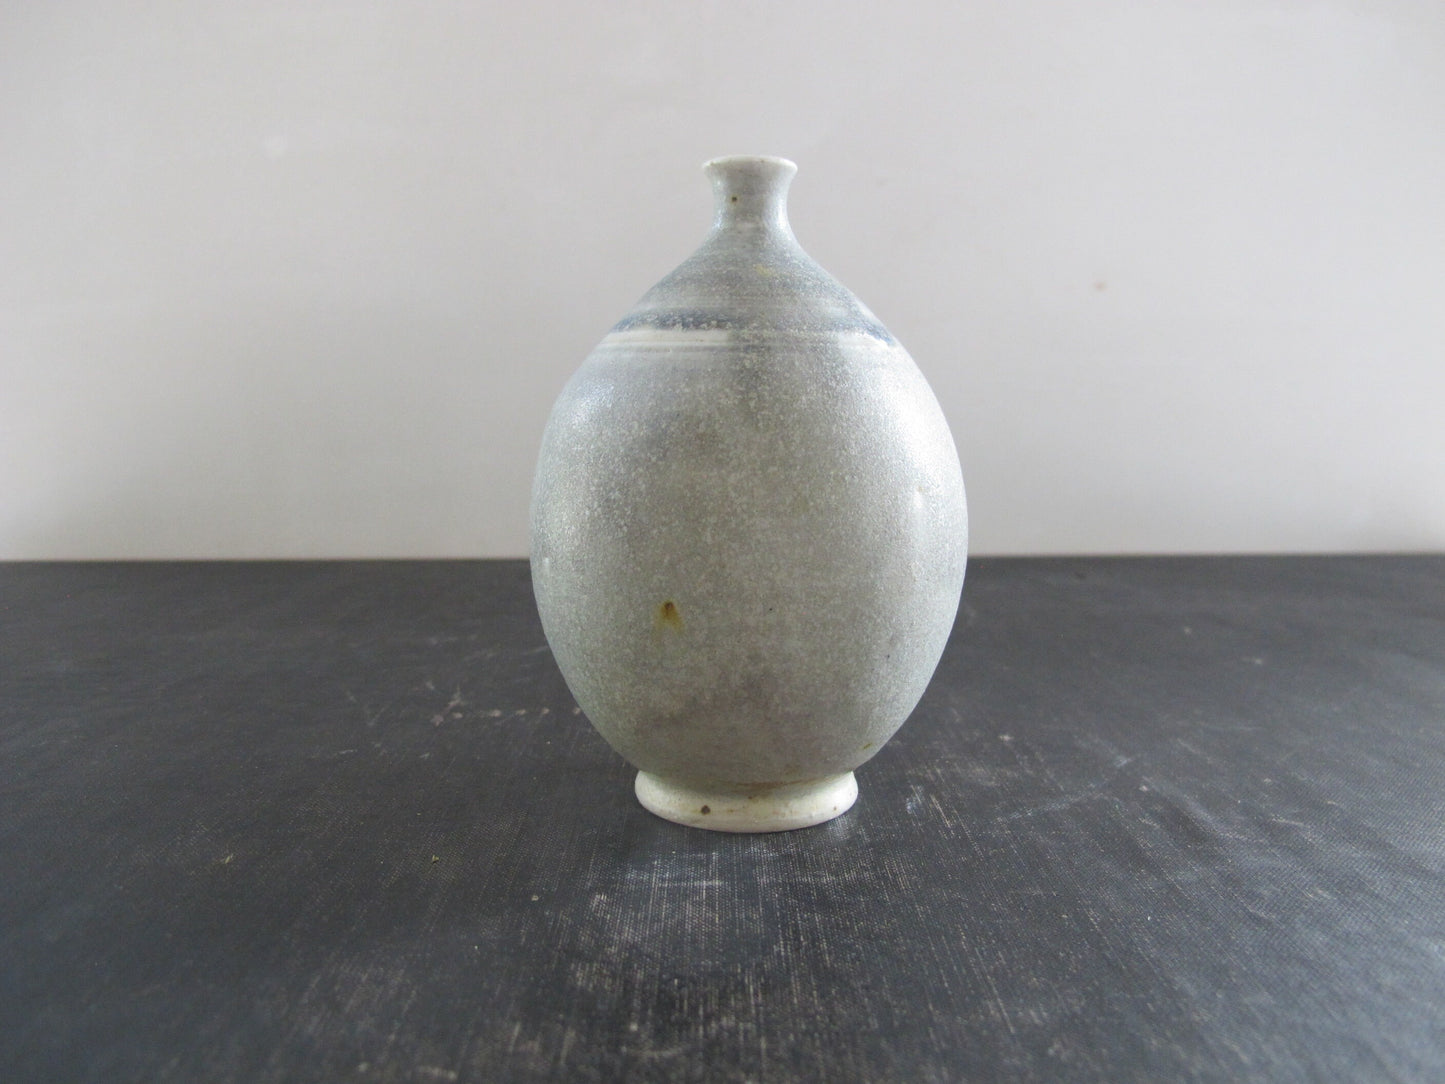 Vase Studio Pottery Exquisitely Thrown and Glazed Near Miniature American 1960s 1970s West Coast